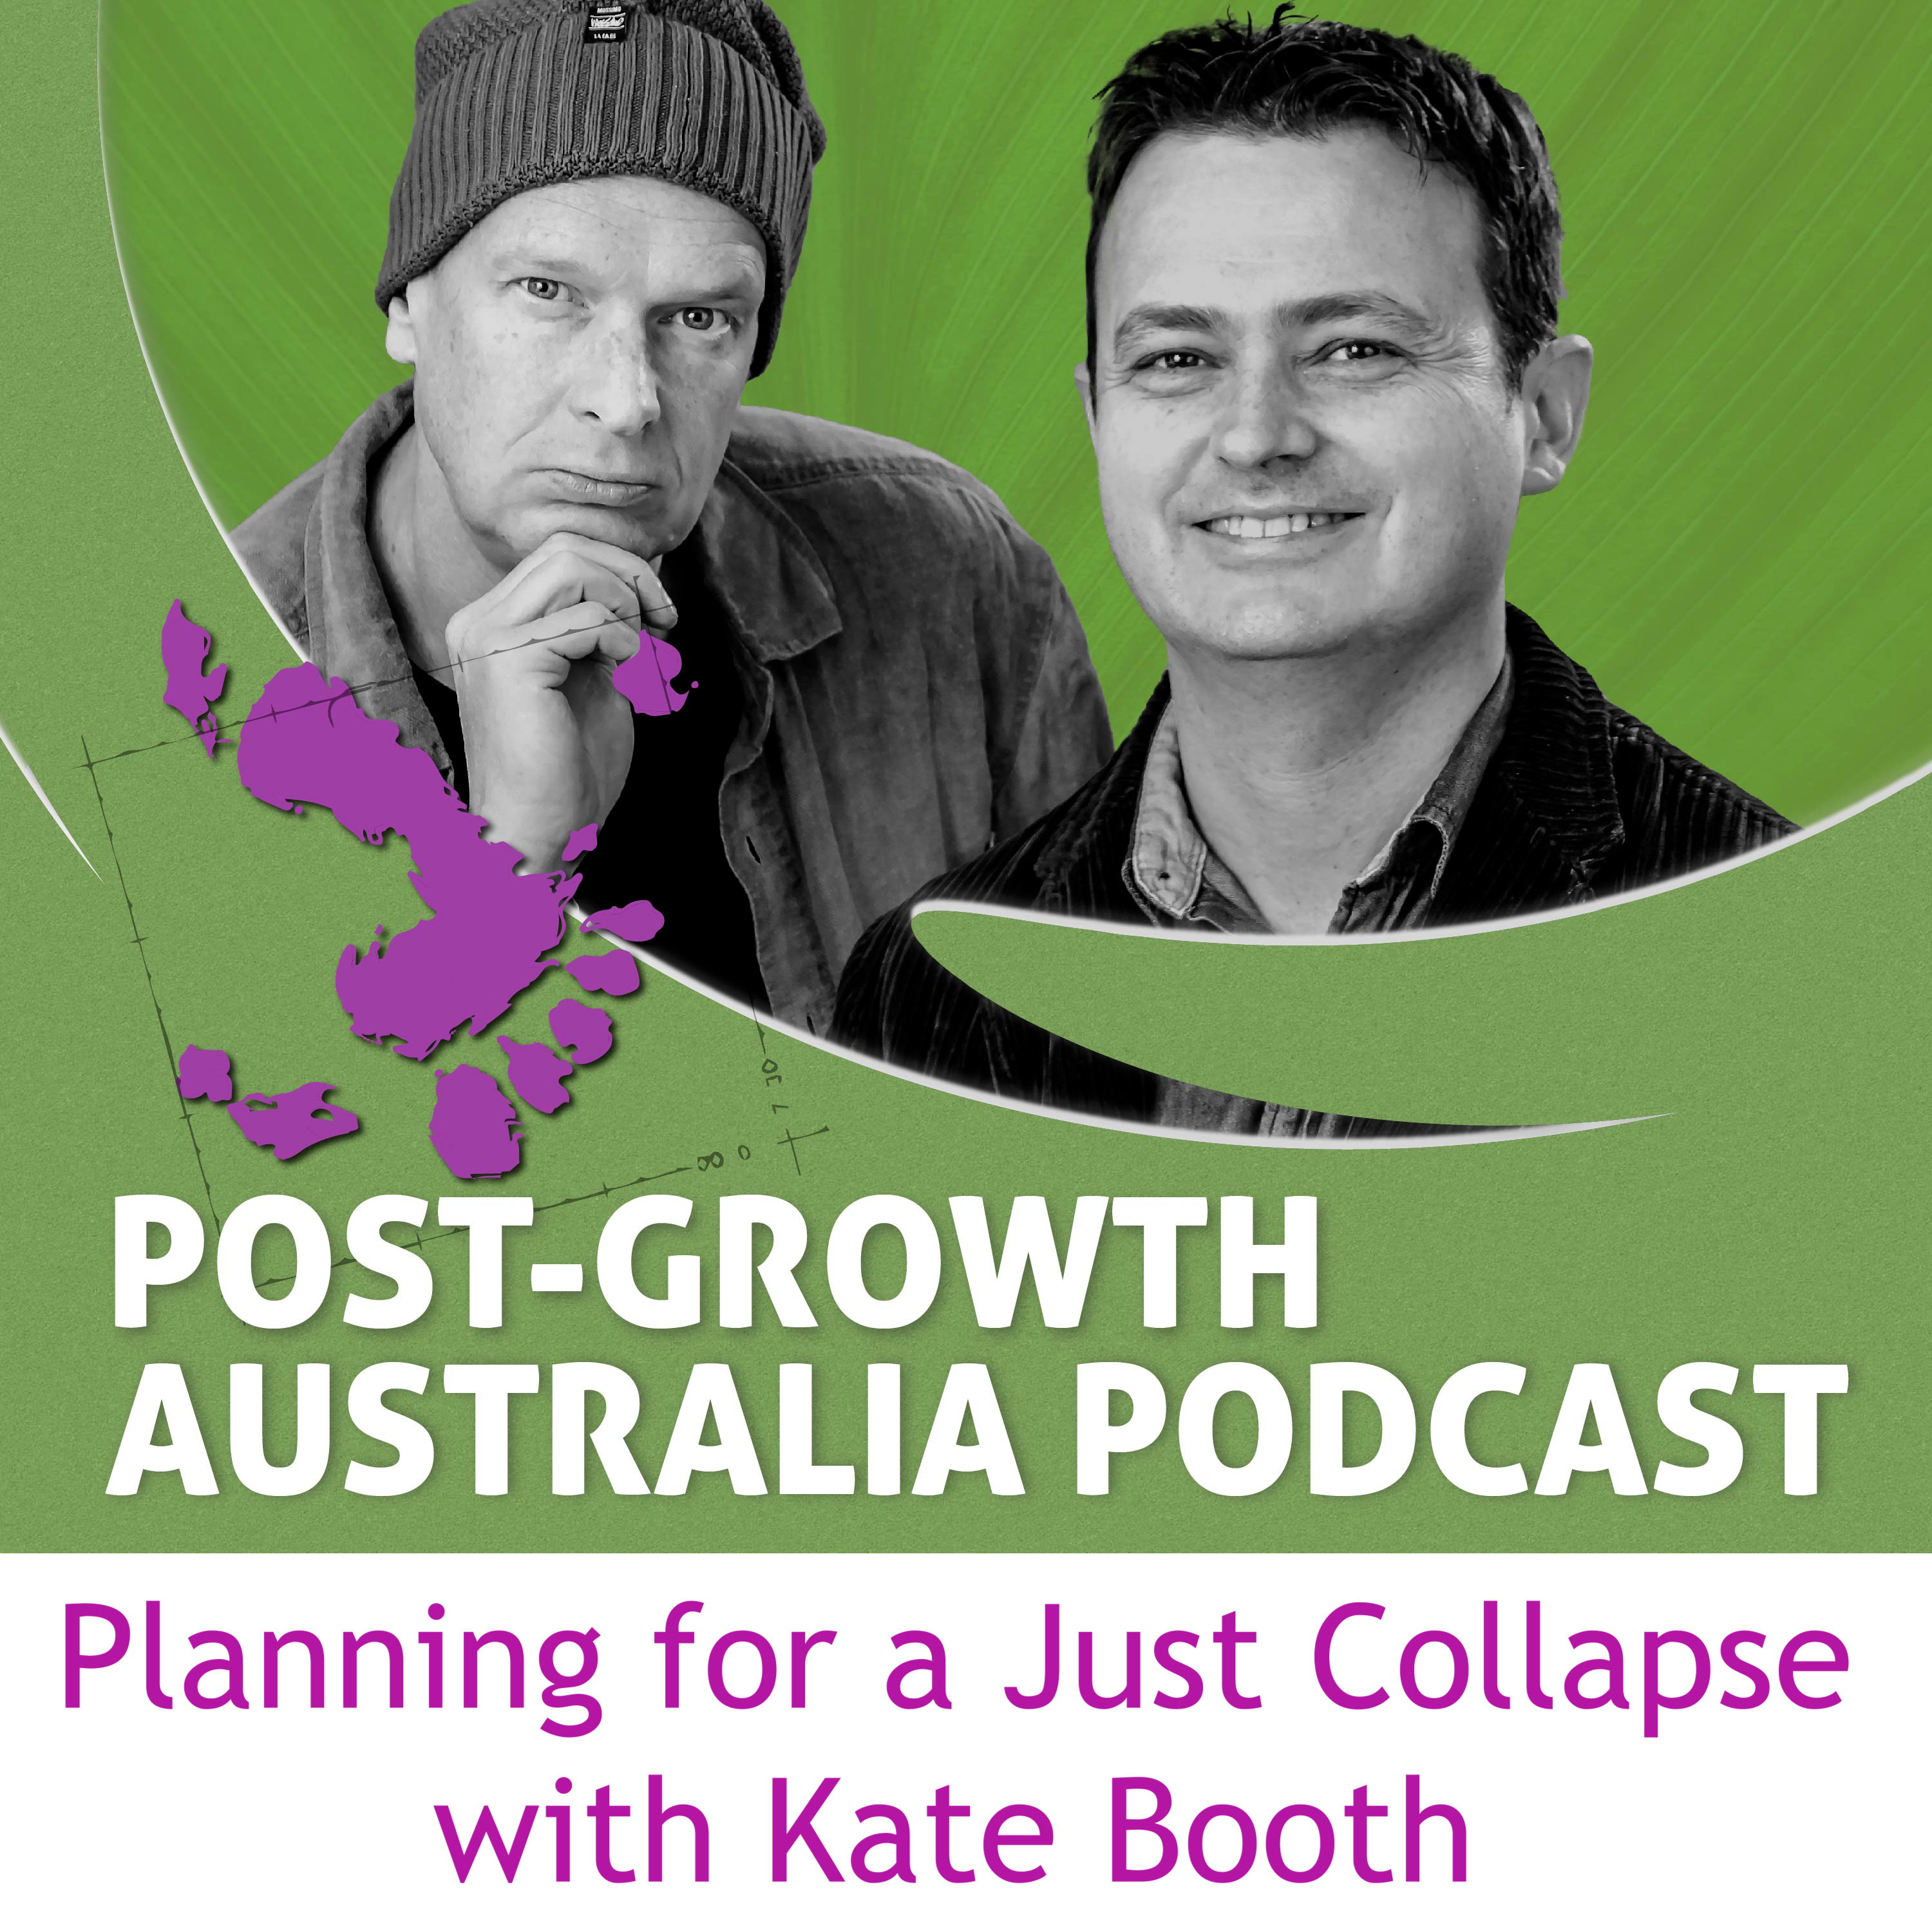 Planning for a Just Collapse with Kate Booth